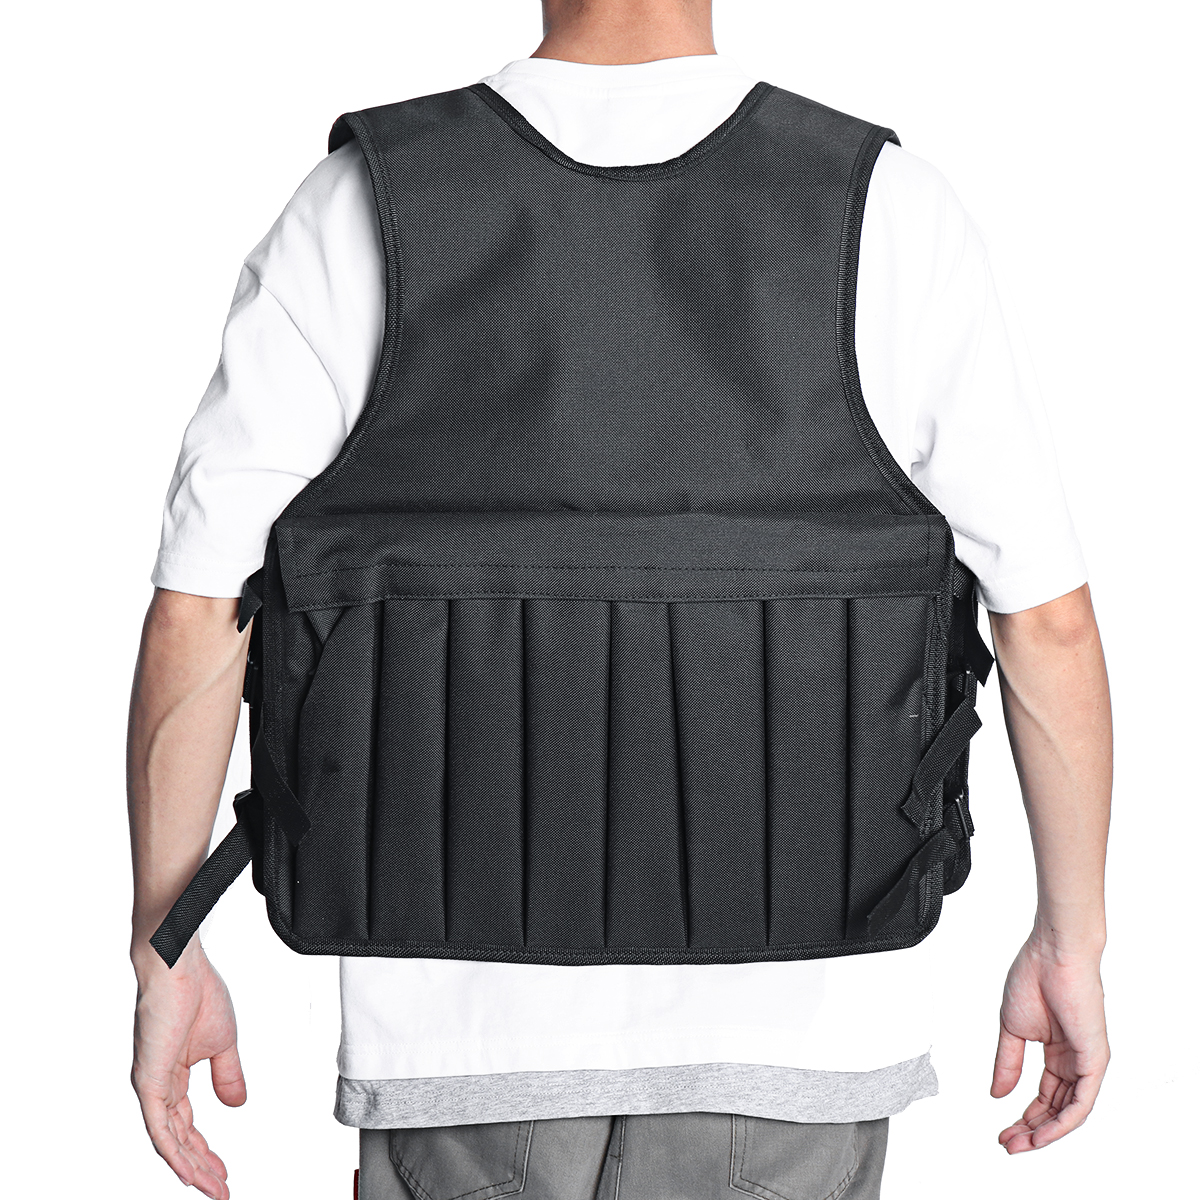 Adjustable-Weight-Vest-Running-Sports-Shaping-Slimming-Fitness-Weight-Bearing-Equipment-1695473-6